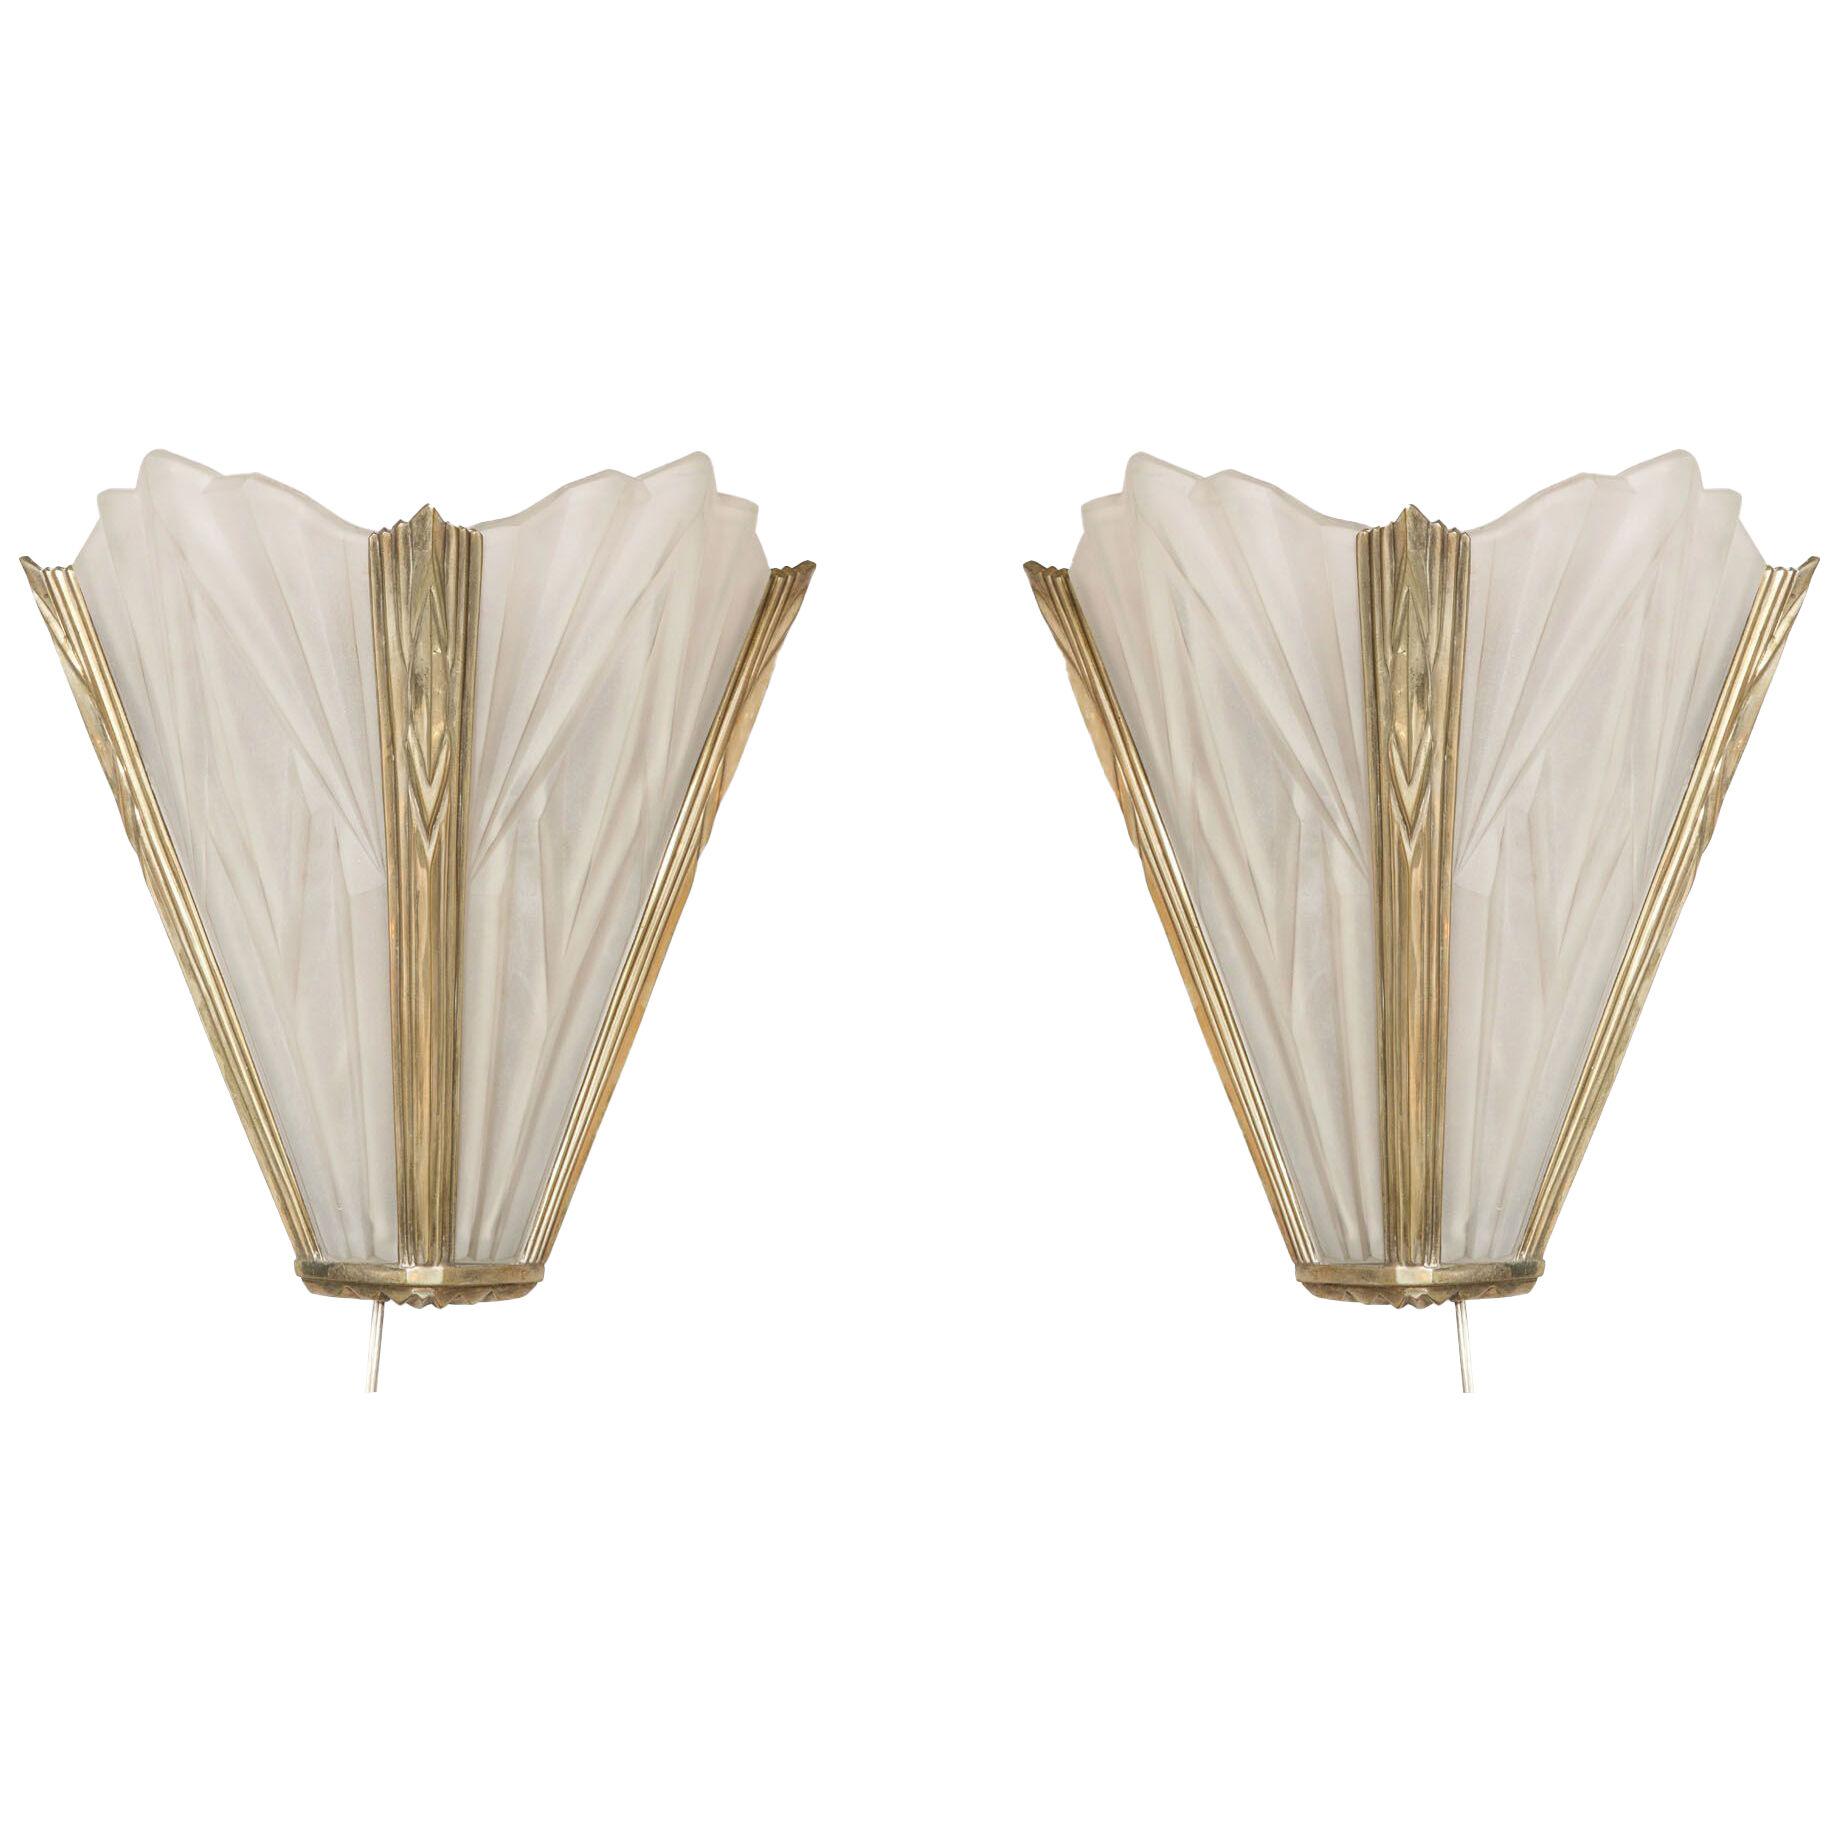 Art Deco Nickel Plated Geometric Sconces with Frosted Glass Shades